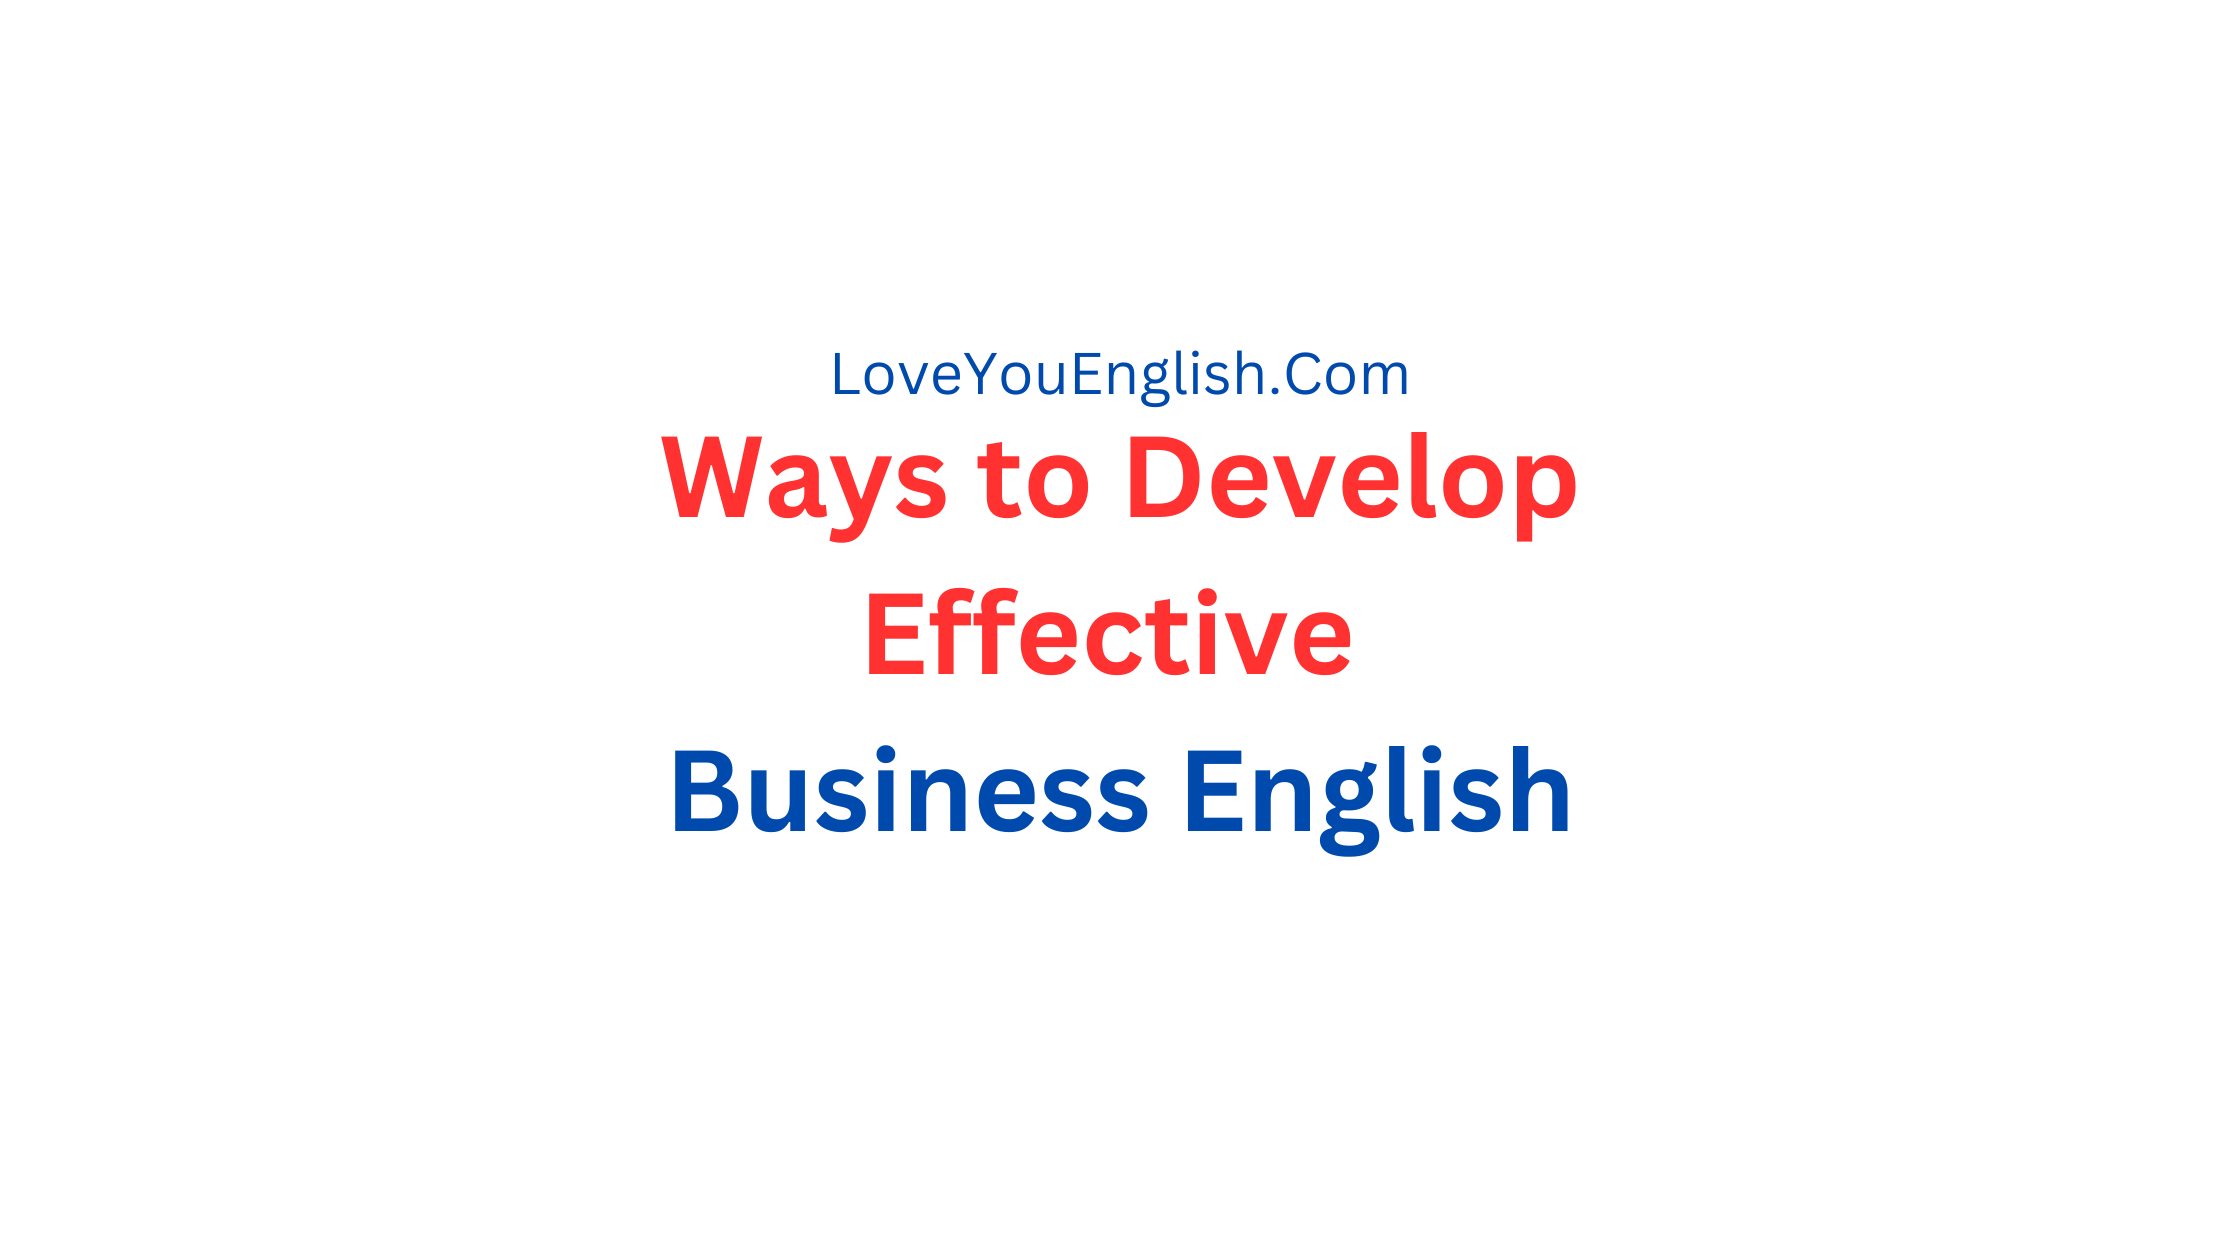 Ways to Develop Effective Business English